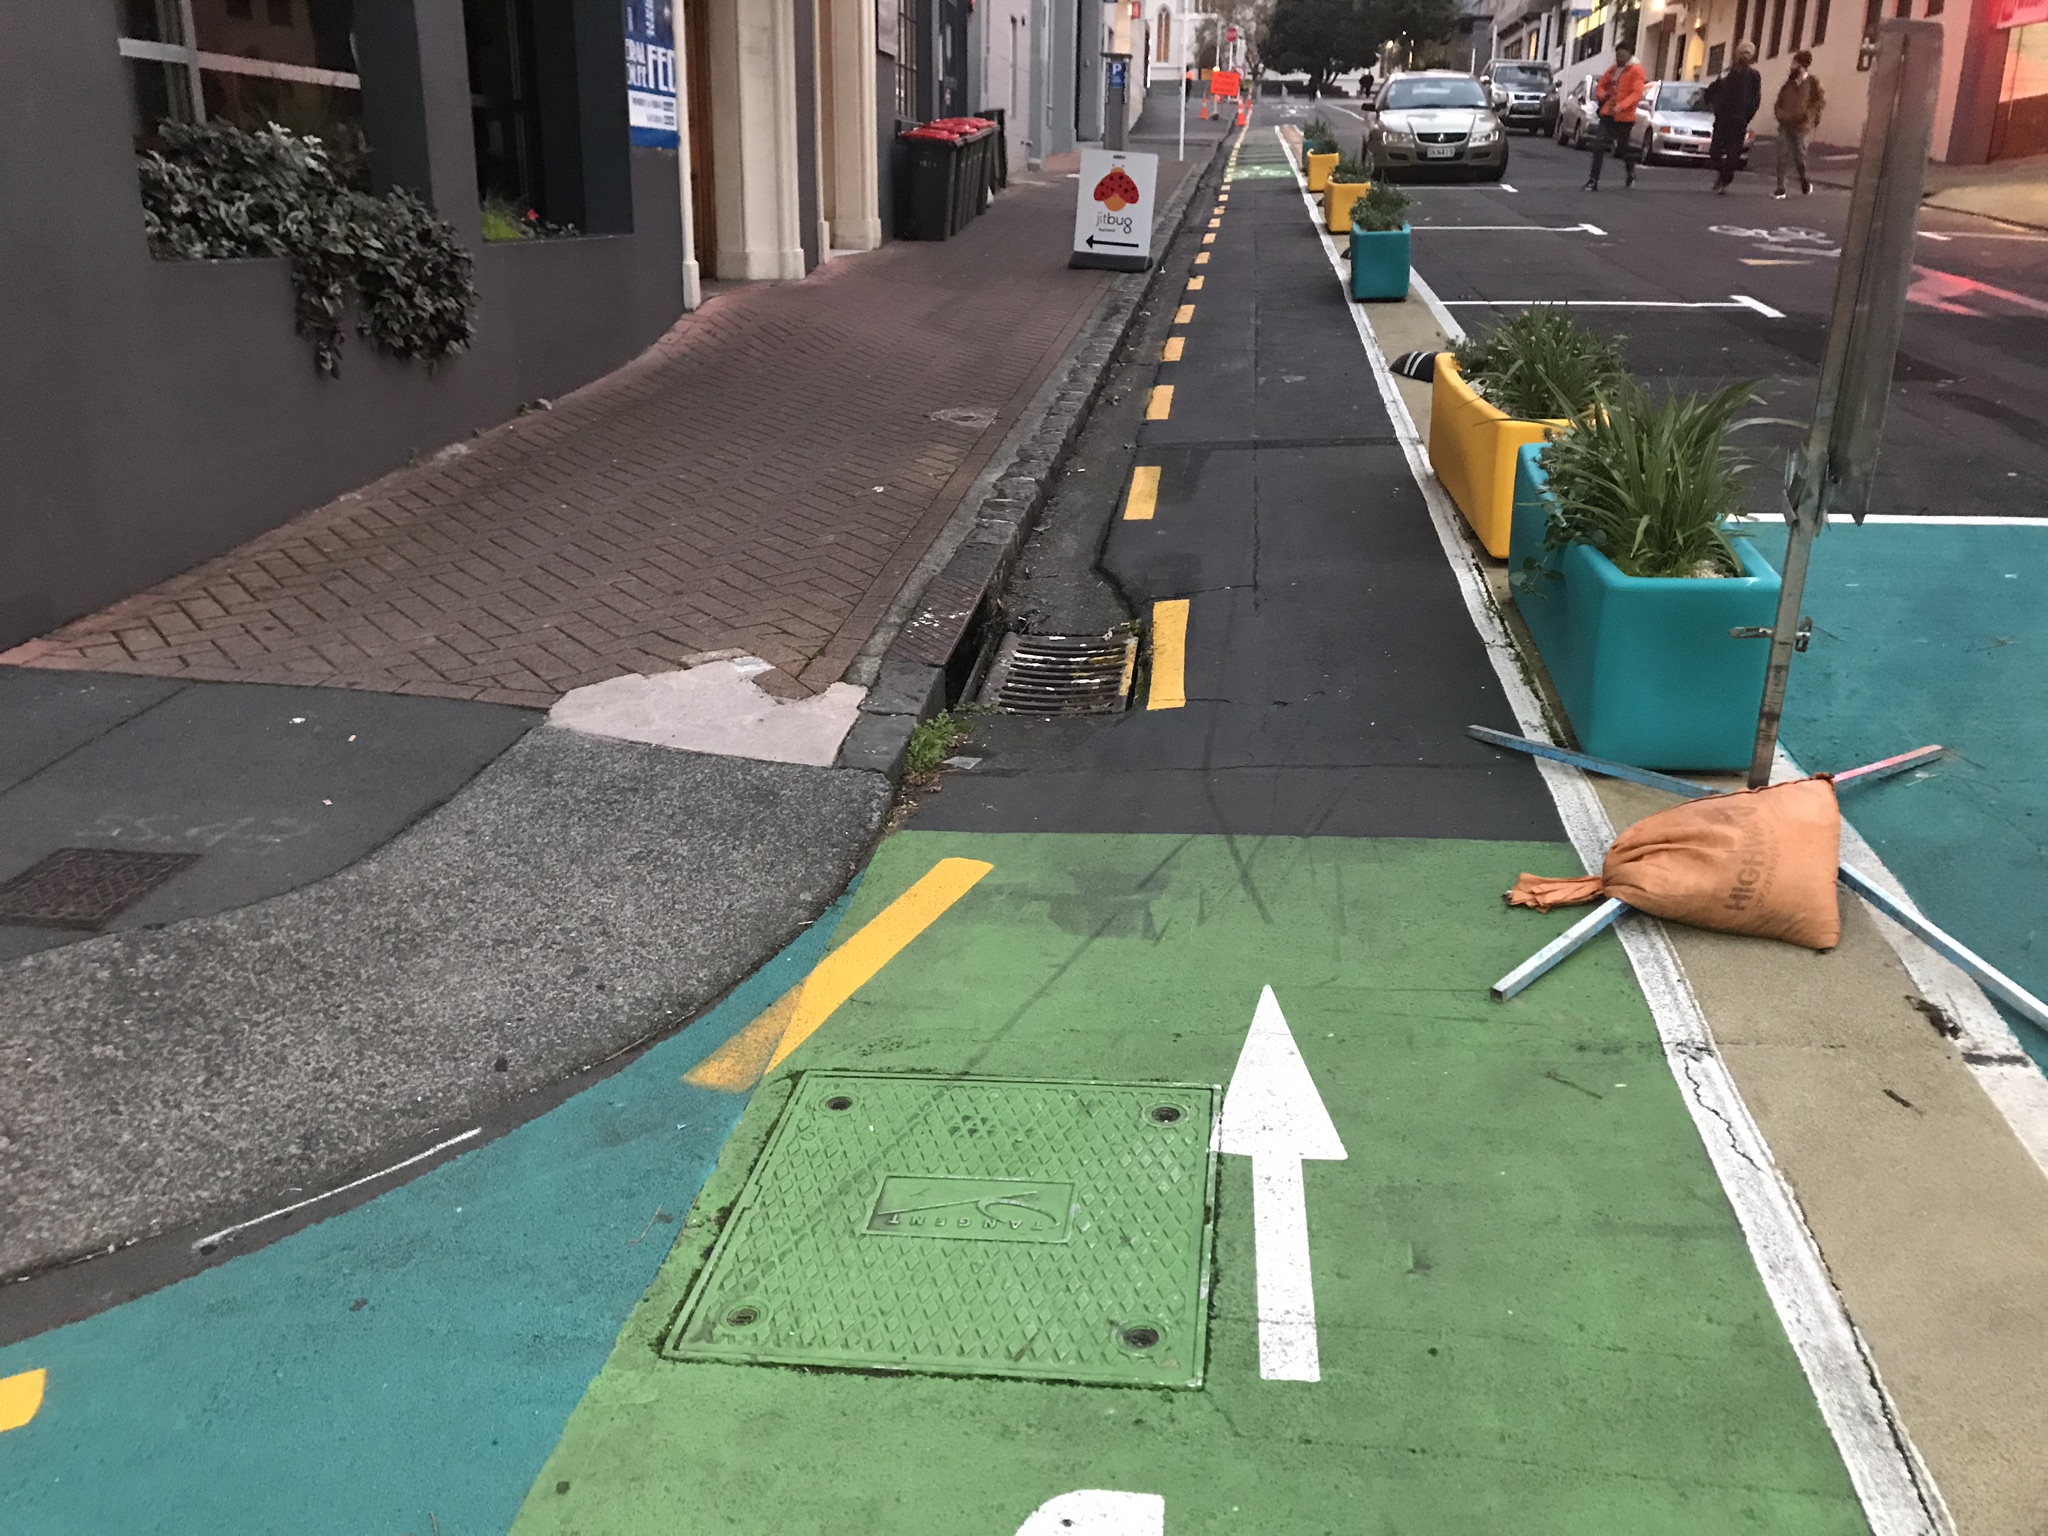 Contra-flow cycle lane